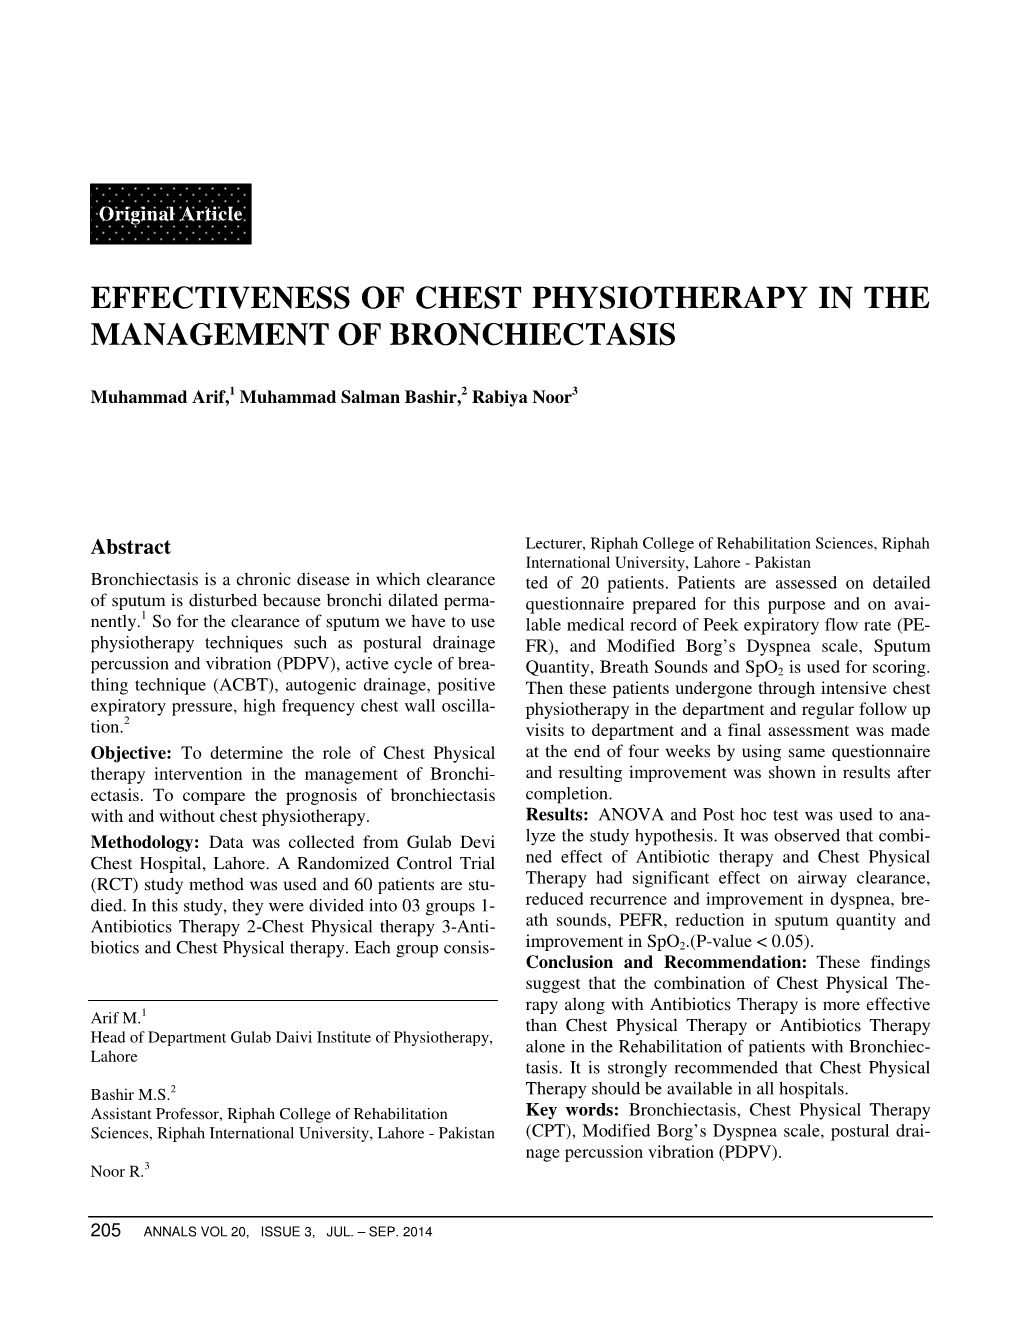 Effectiveness of Chest Physiotherapy in the Management of Bronchiectasis